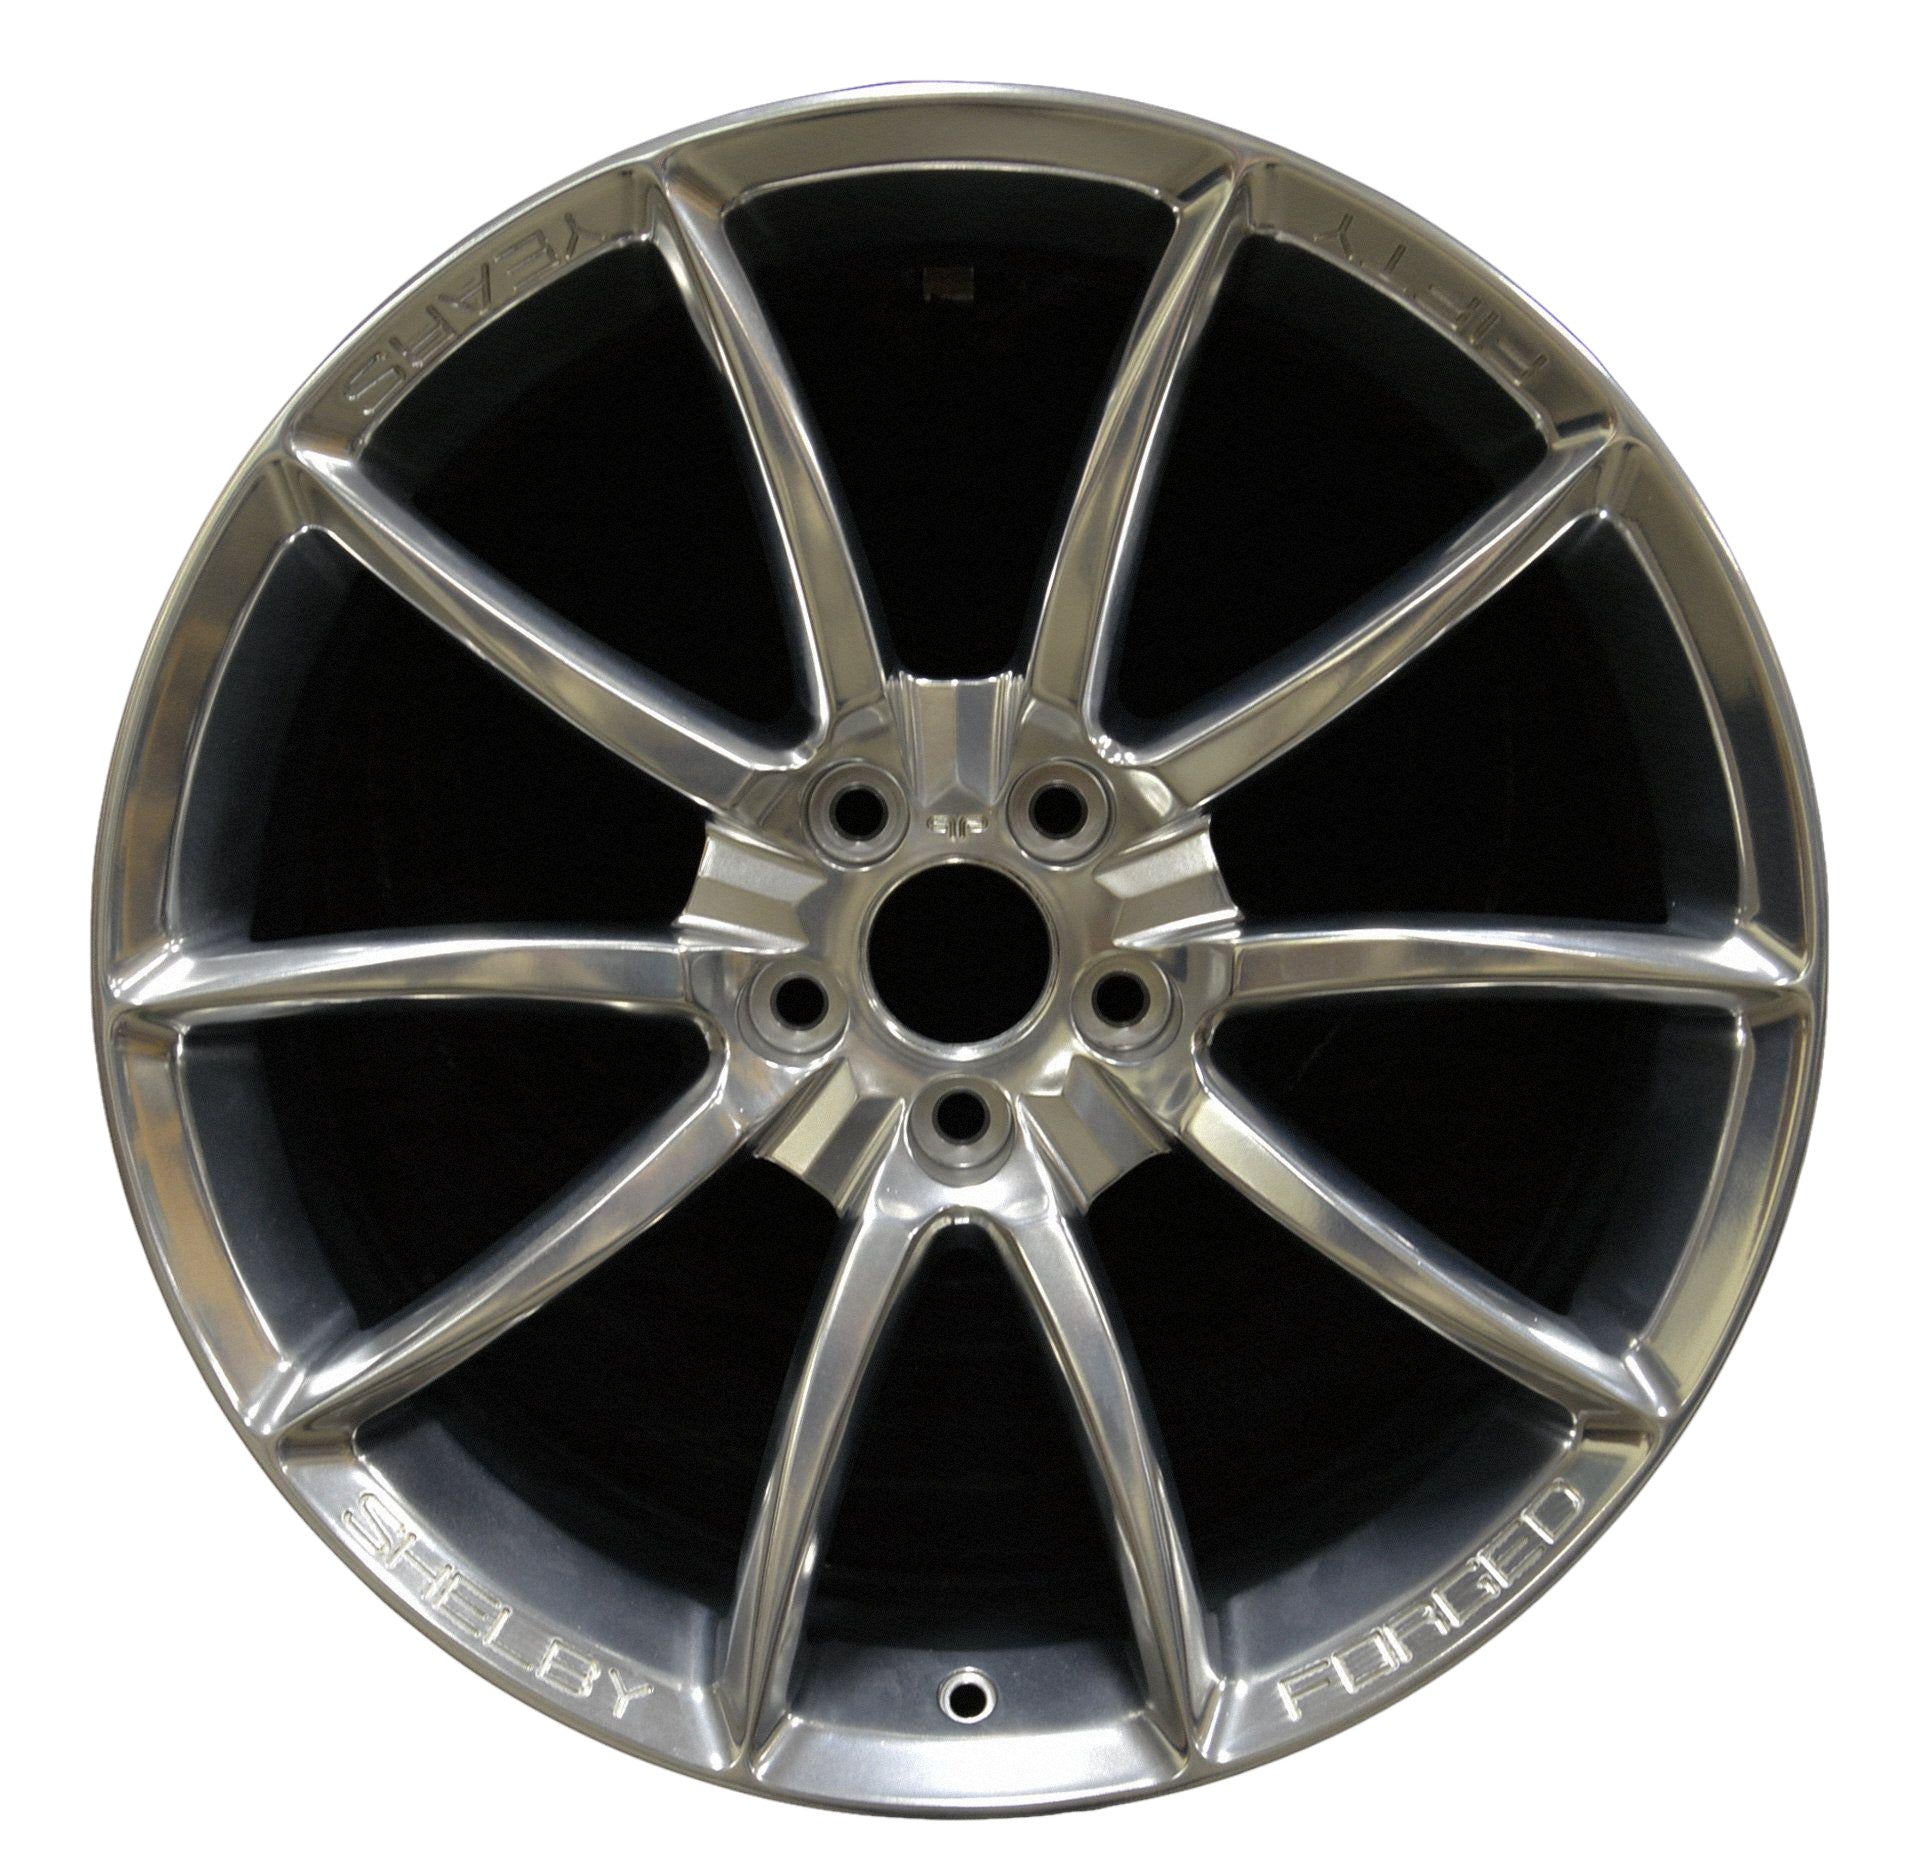 Ford Mustang  2005, 2006, 2007, 2008, 2009, 2010, 2011, 2012 Factory OEM Car Wheel Size 20x9 Alloy WAO.200016.FULL.POL